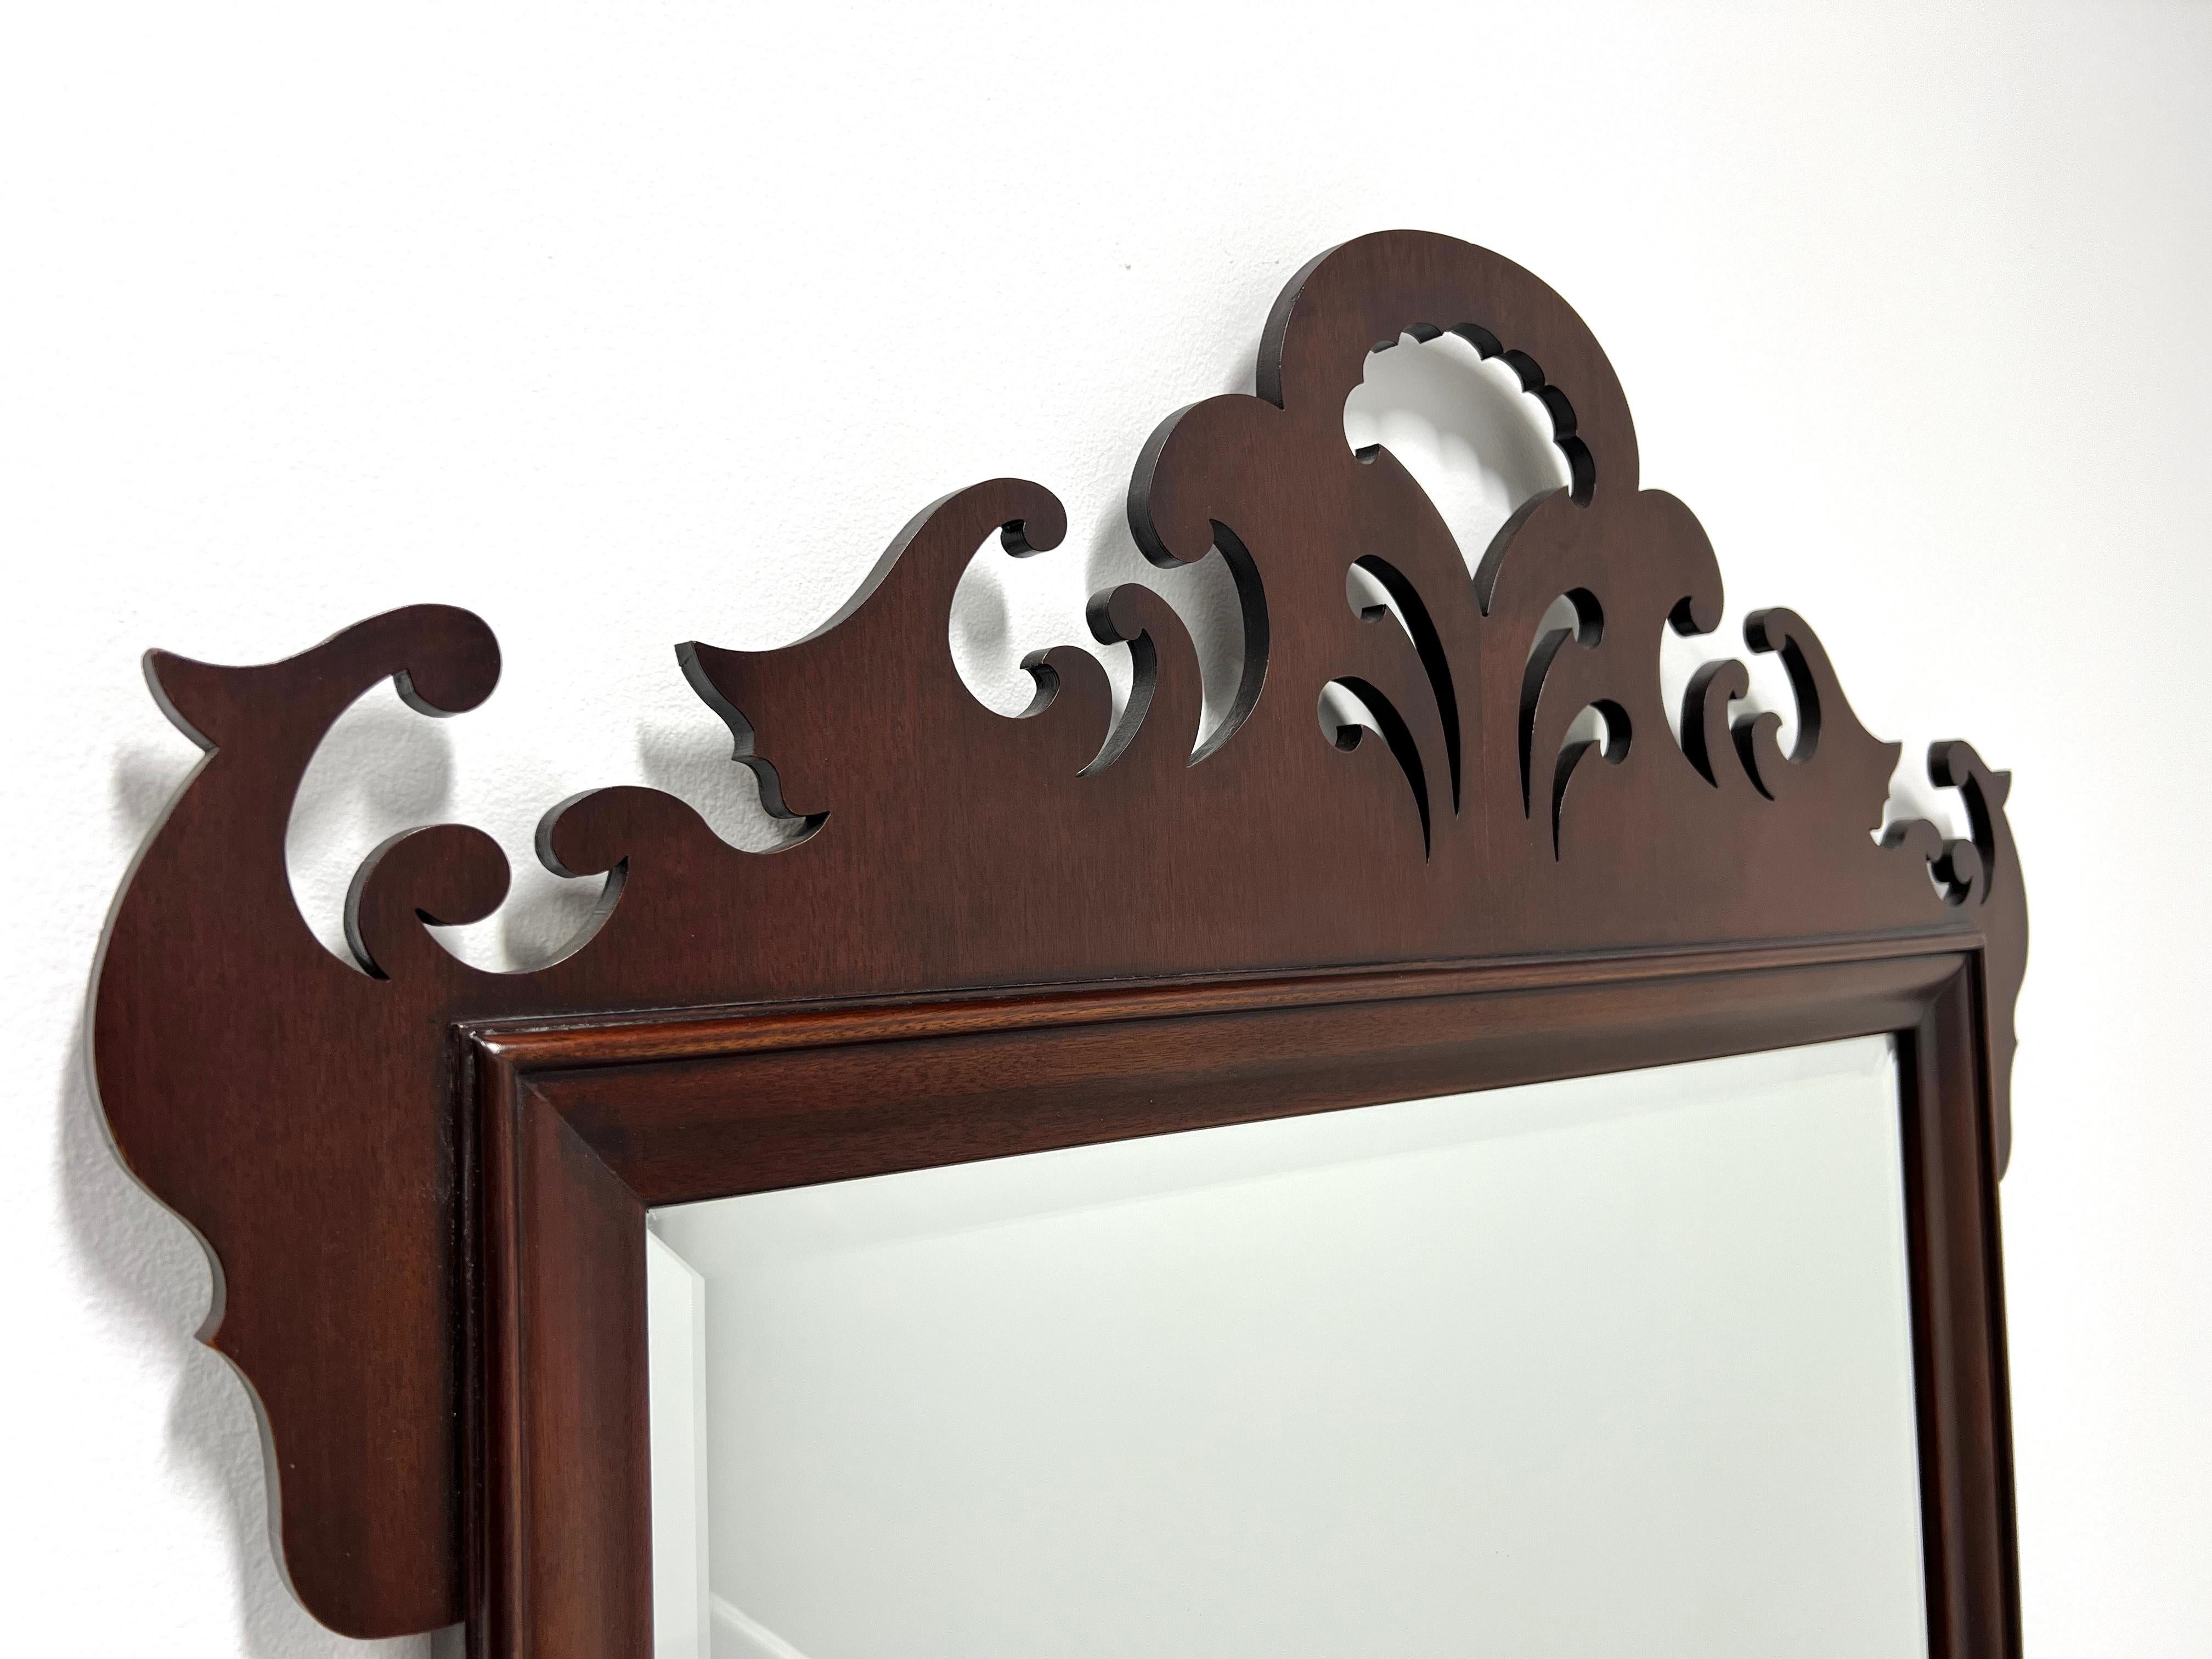 A large Chippendale style beveled wall mirror by White Furniture. Bevel edge mirrored glass, mahogany frame with decorative carving to the top and bottom. Made in Mebane, North Carolina, USA, in the late 20th Century. 

Style #: 805-42-8

Measures: 